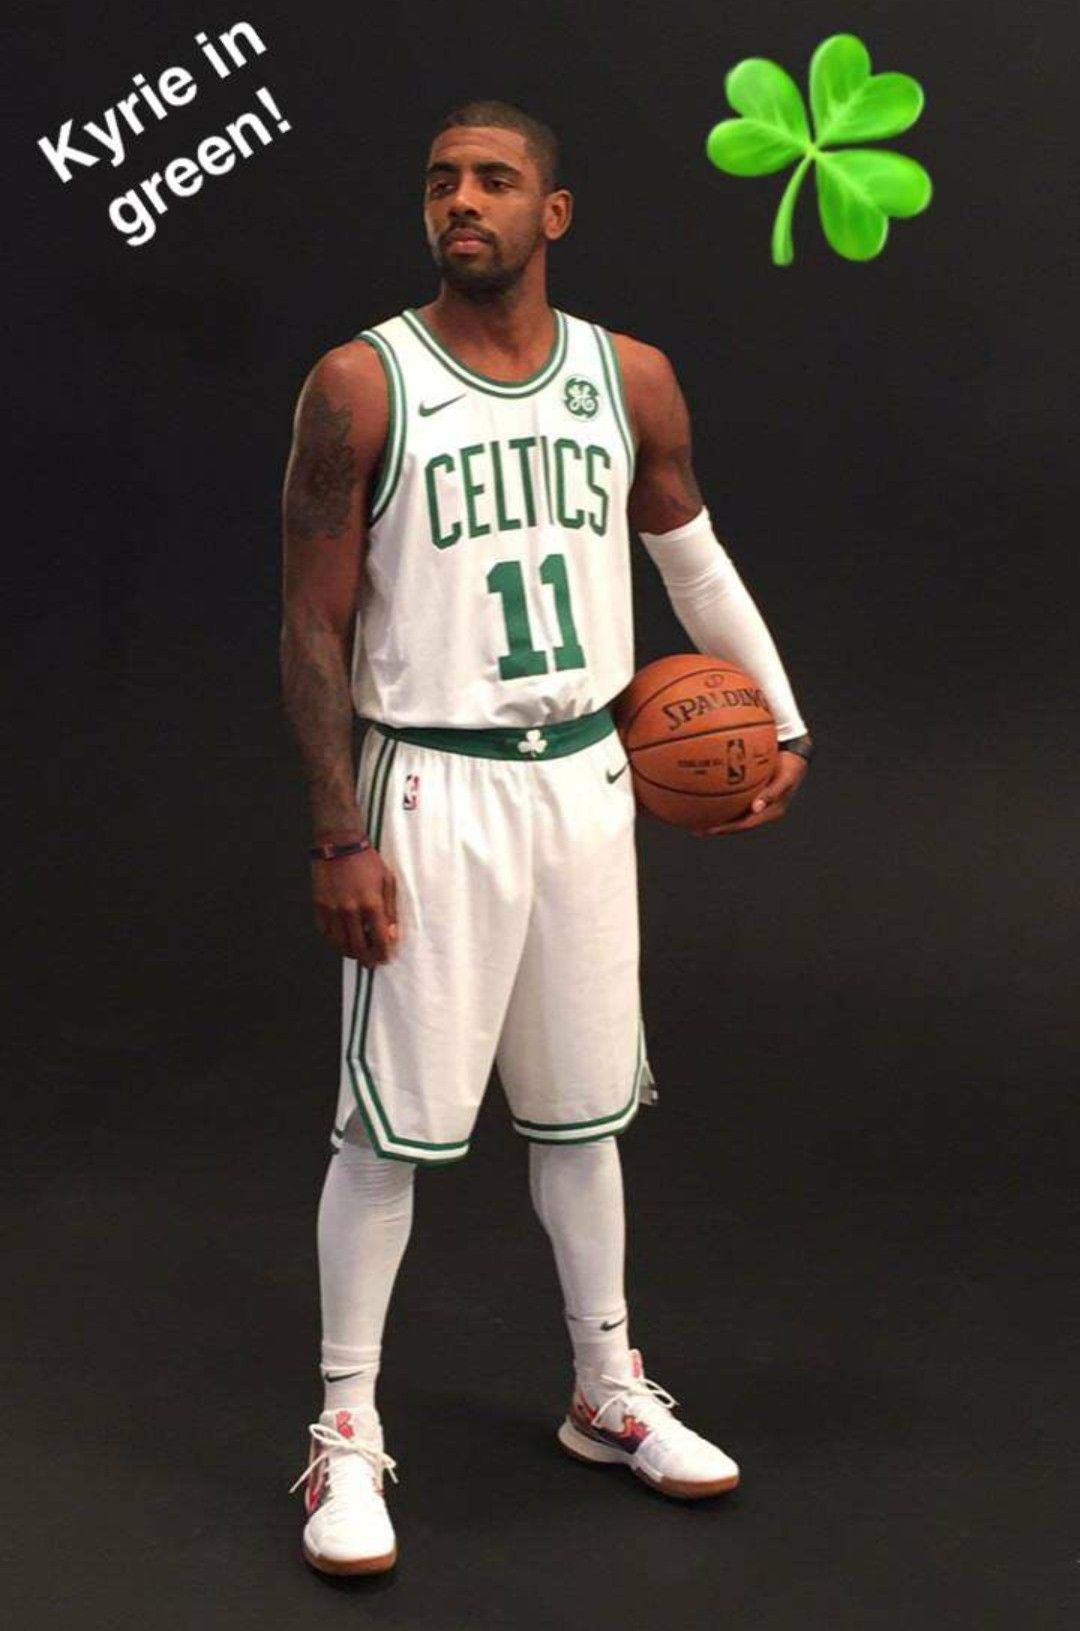 Kyrie Iphone Wallpaper - Kyrie Irving Wallpaper For Iphone , HD Wallpaper & Backgrounds